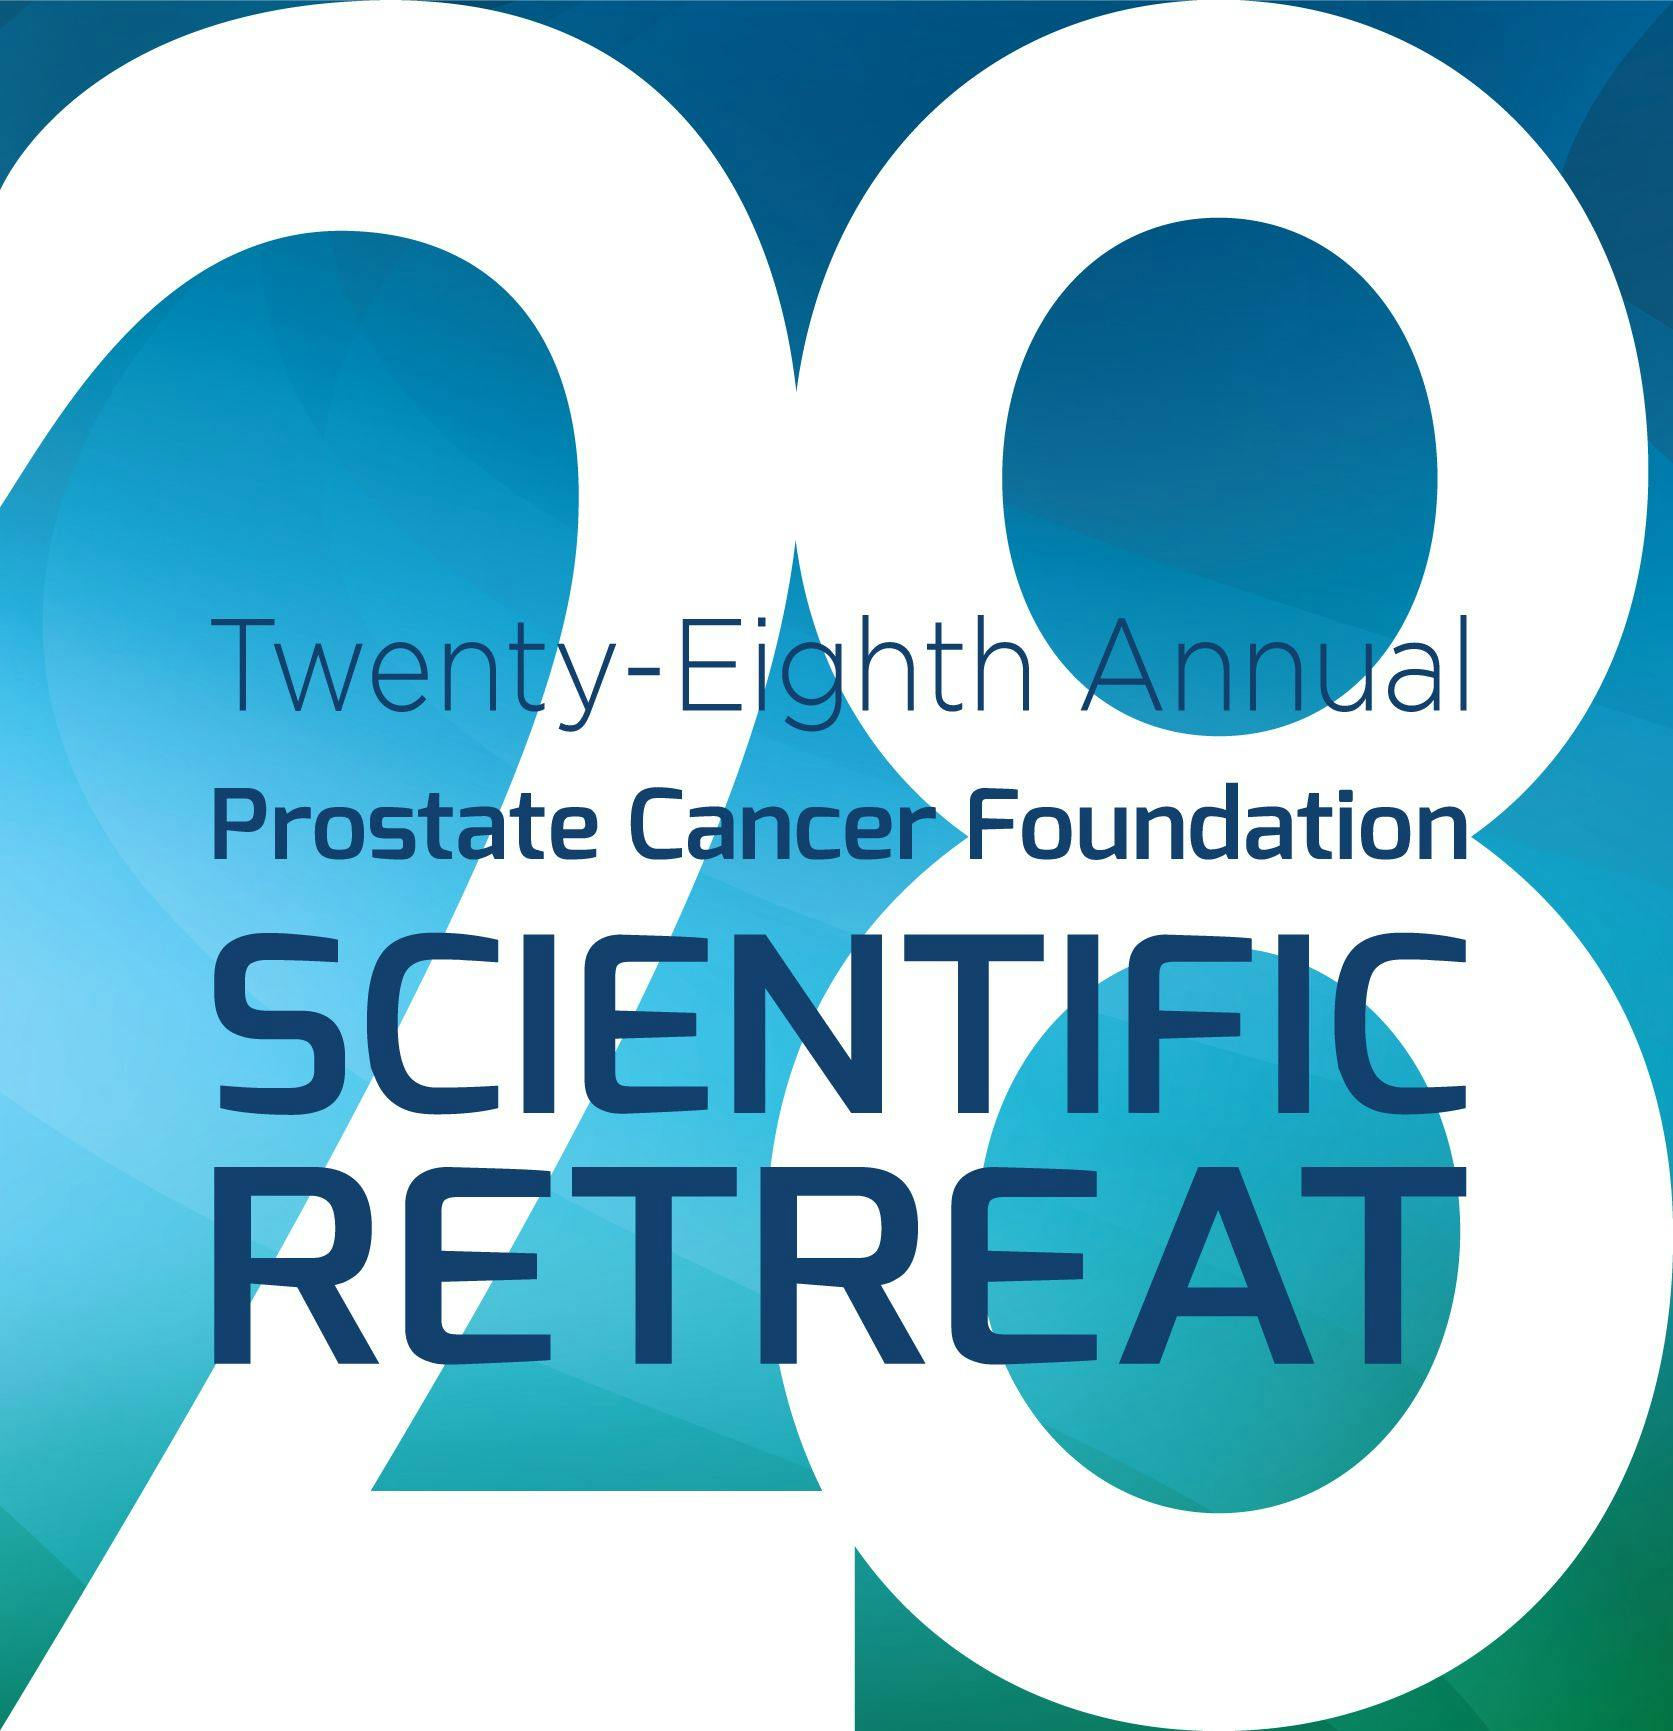 Prostate Cancer Foundation Invites Patients to Join the Conversation